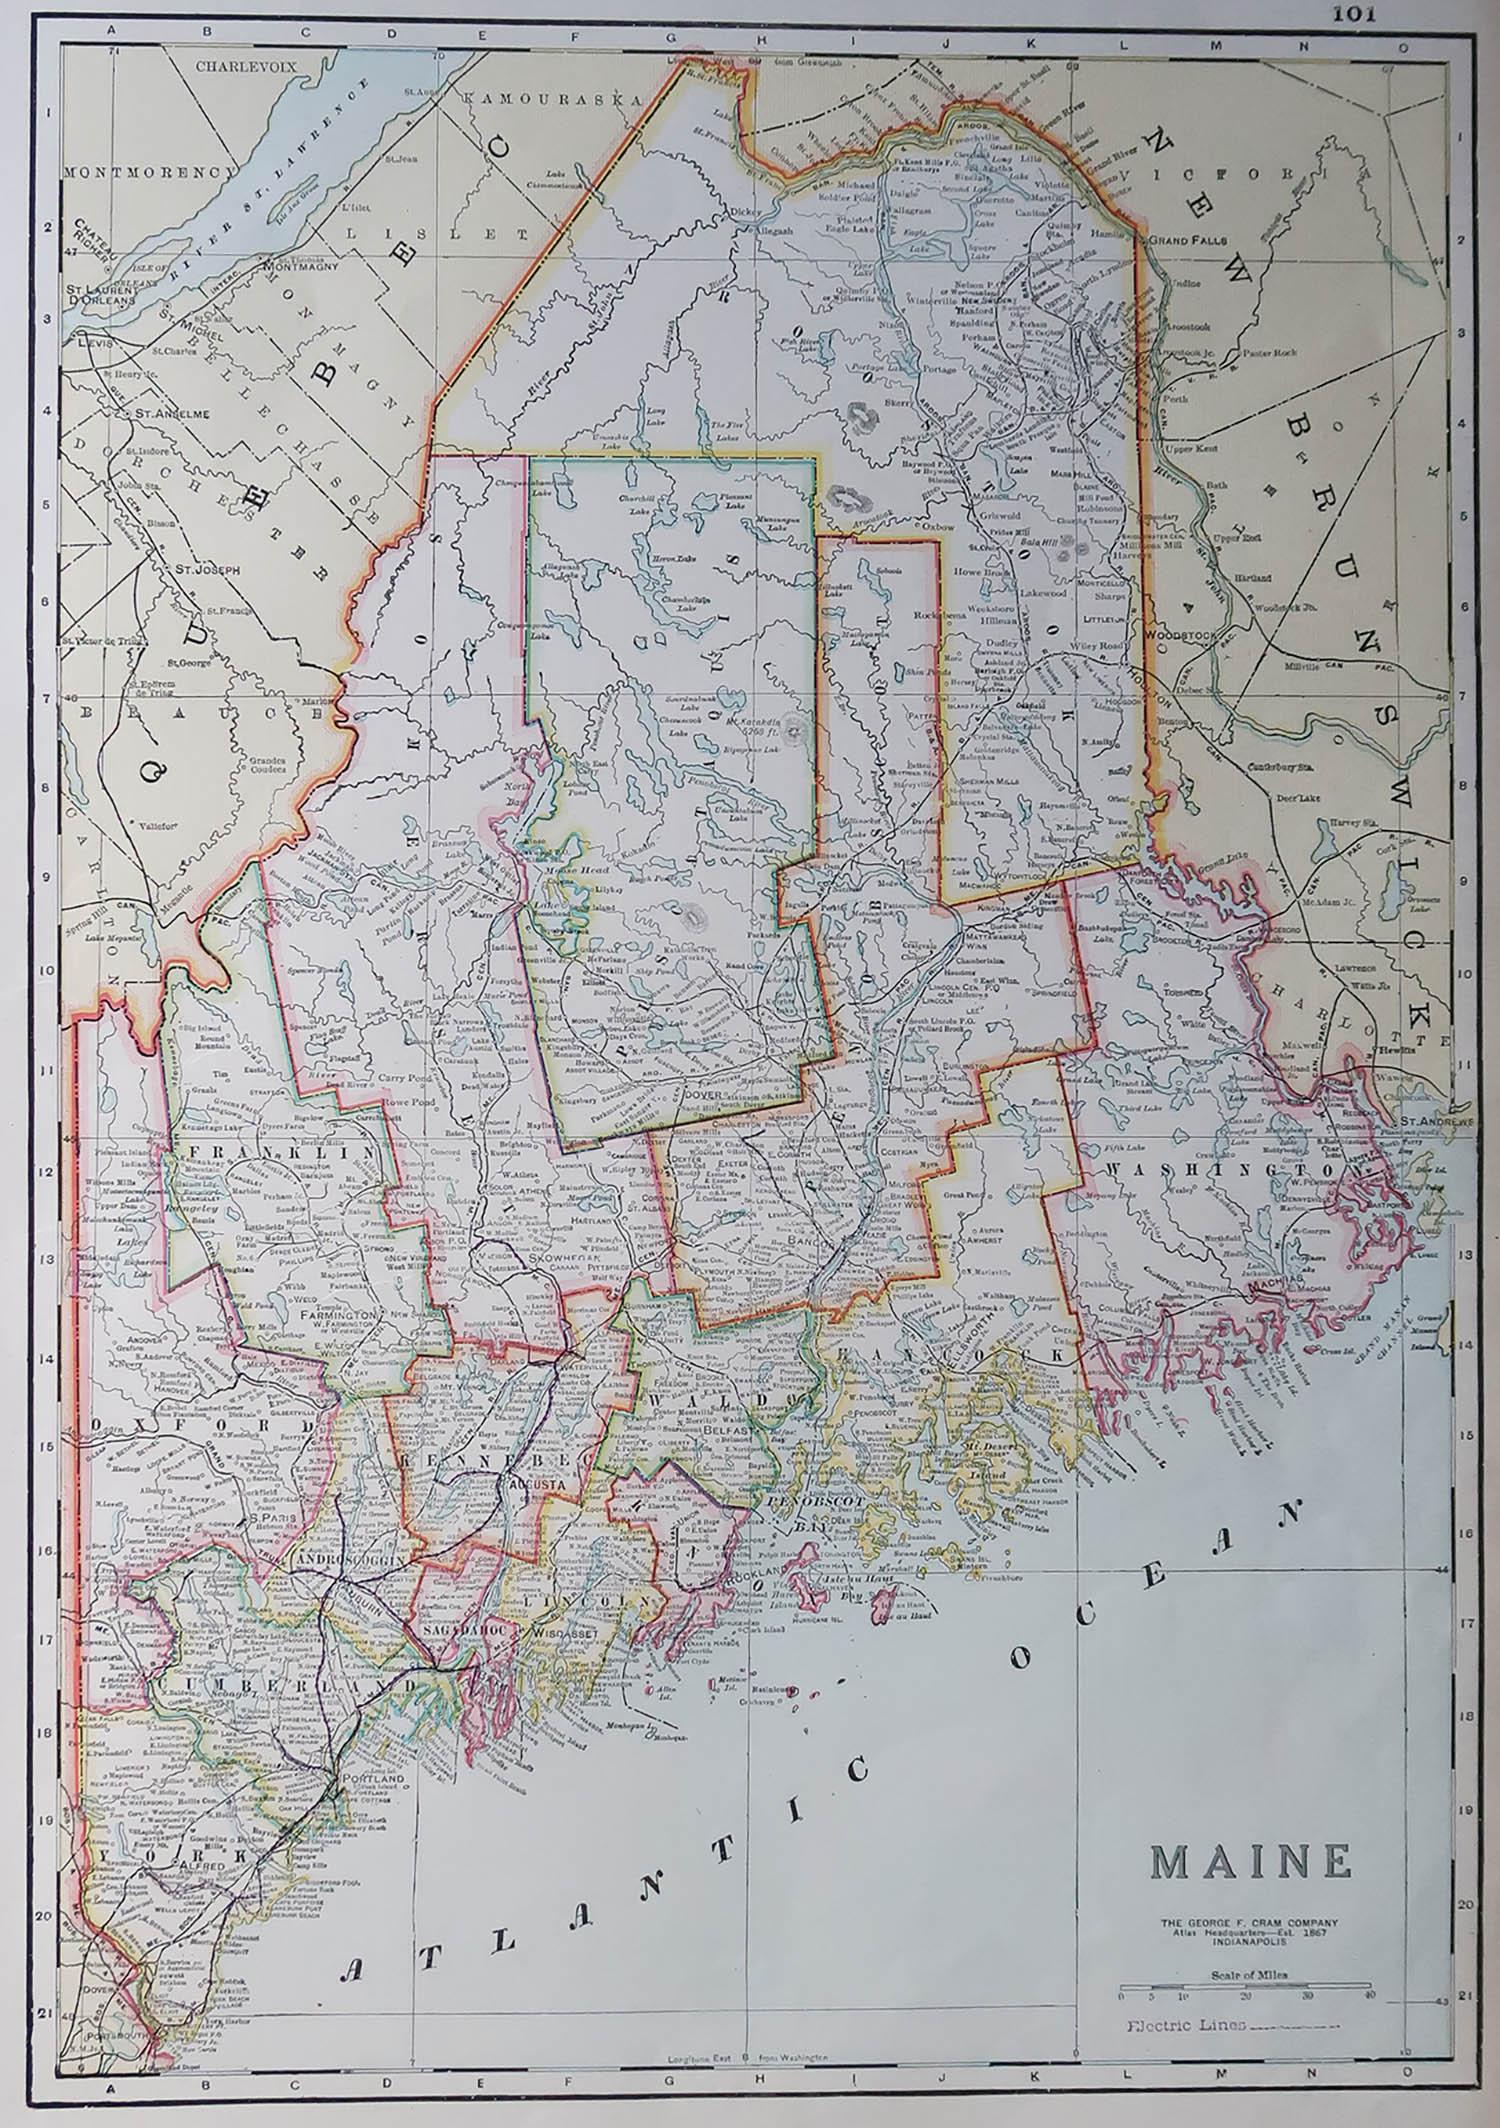 Fabulous map of Maine

Original color

Engraved and printed by the George F. Cram Company, Indianapolis.

Published, C.1900

Unframed

Free shipping.